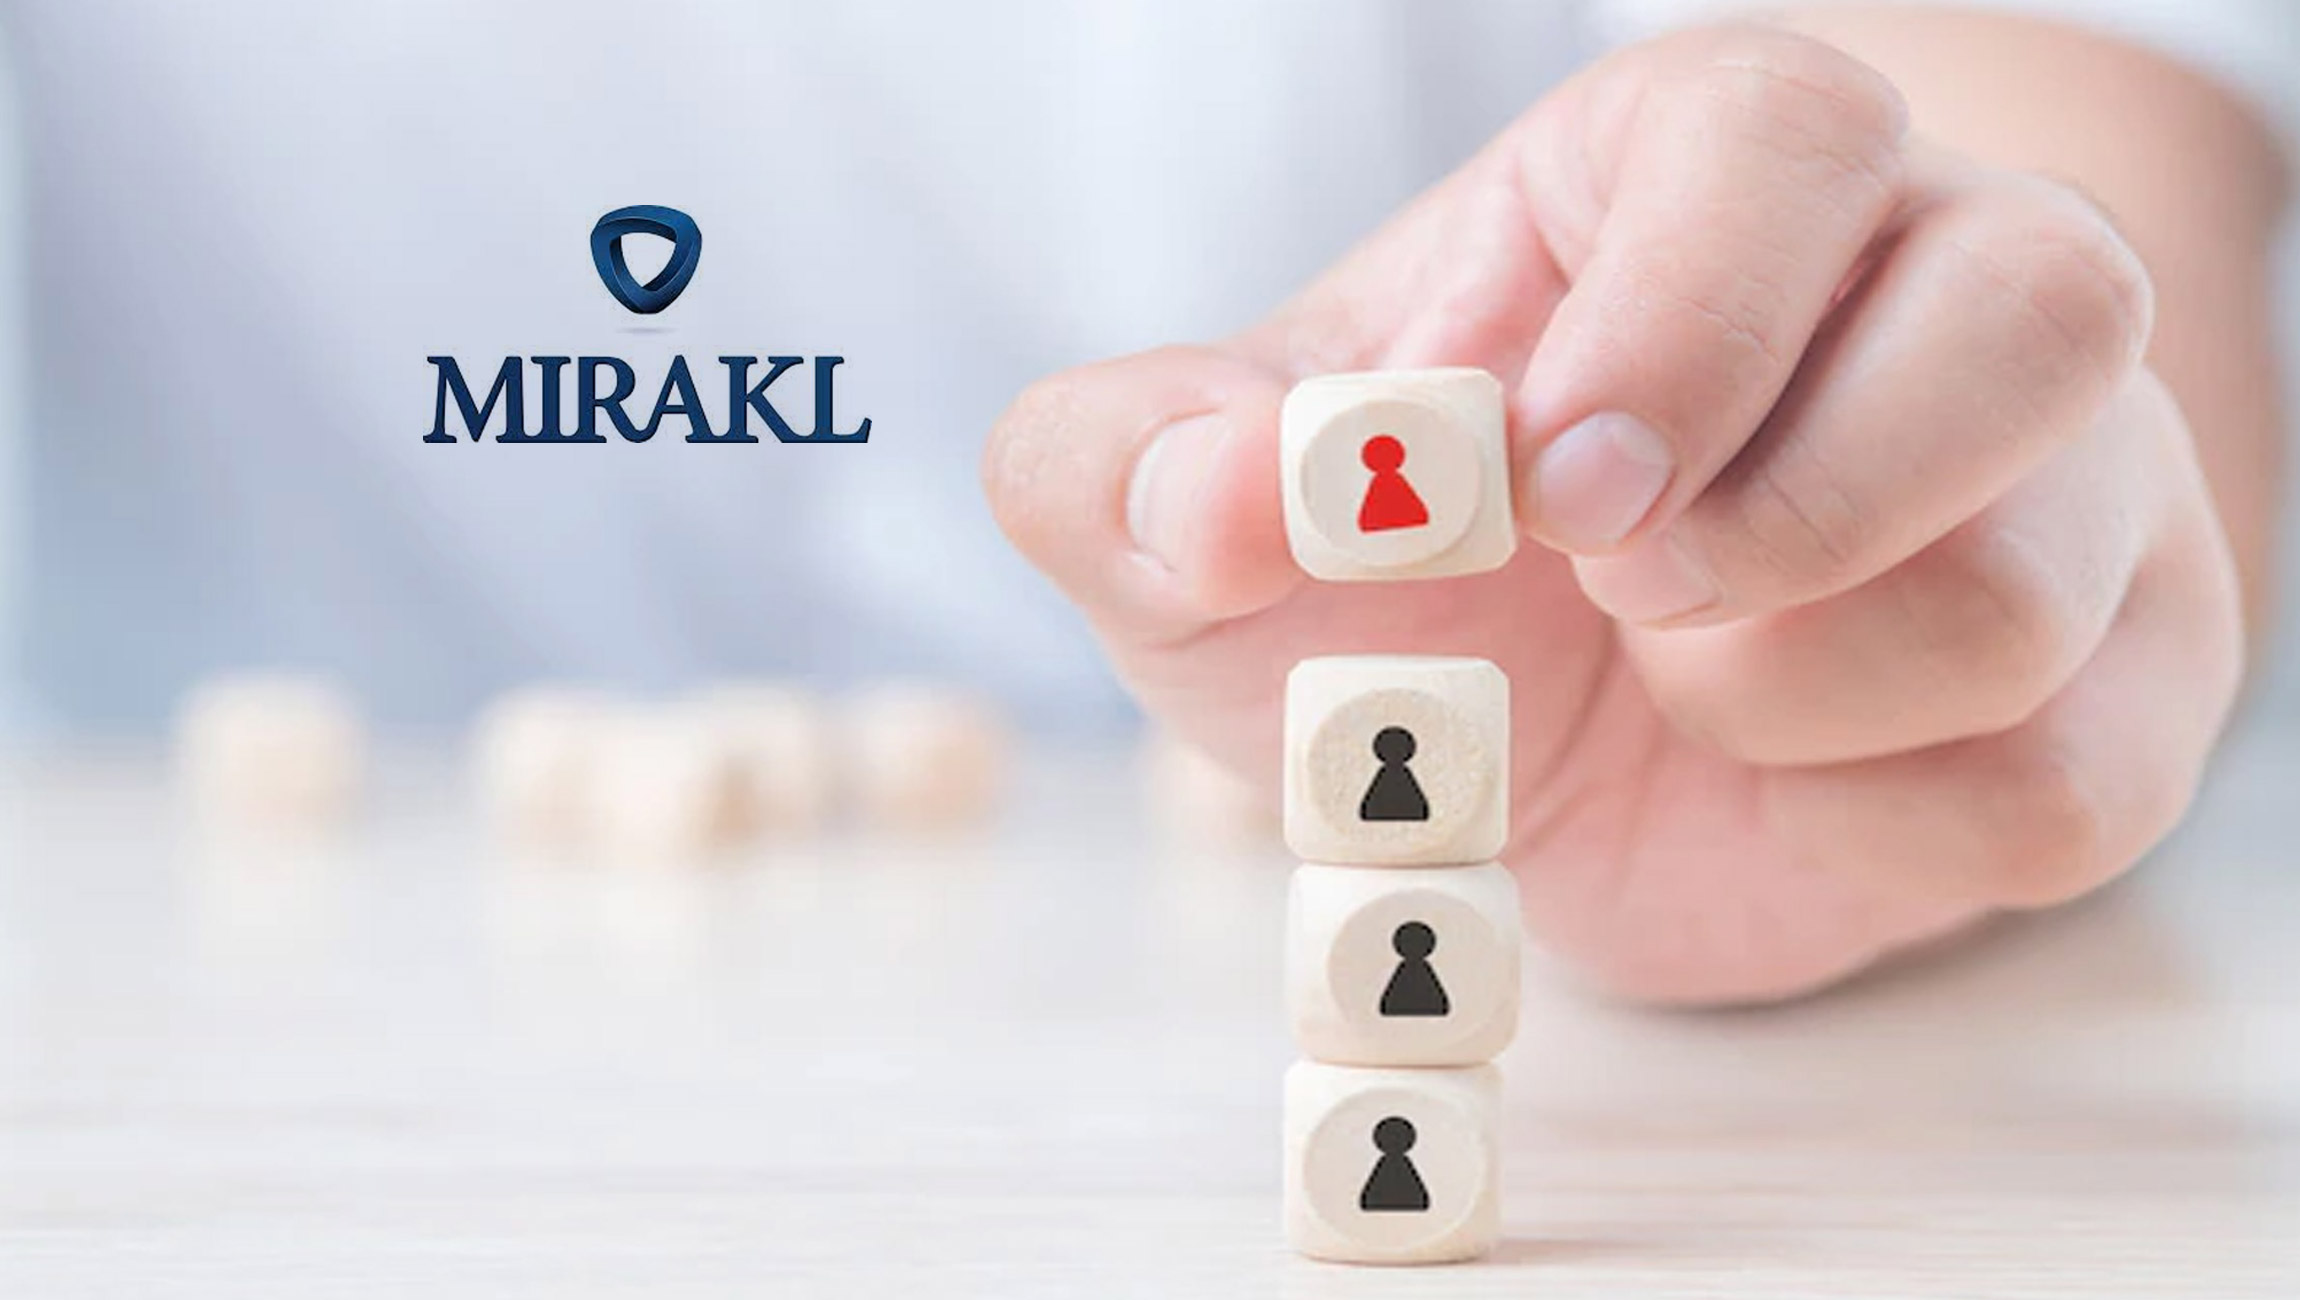 Mirakl Bolsters U.S. Expansion With Appointment of Alex Hase as General Manager and Executive Vice President of Sales, Americas